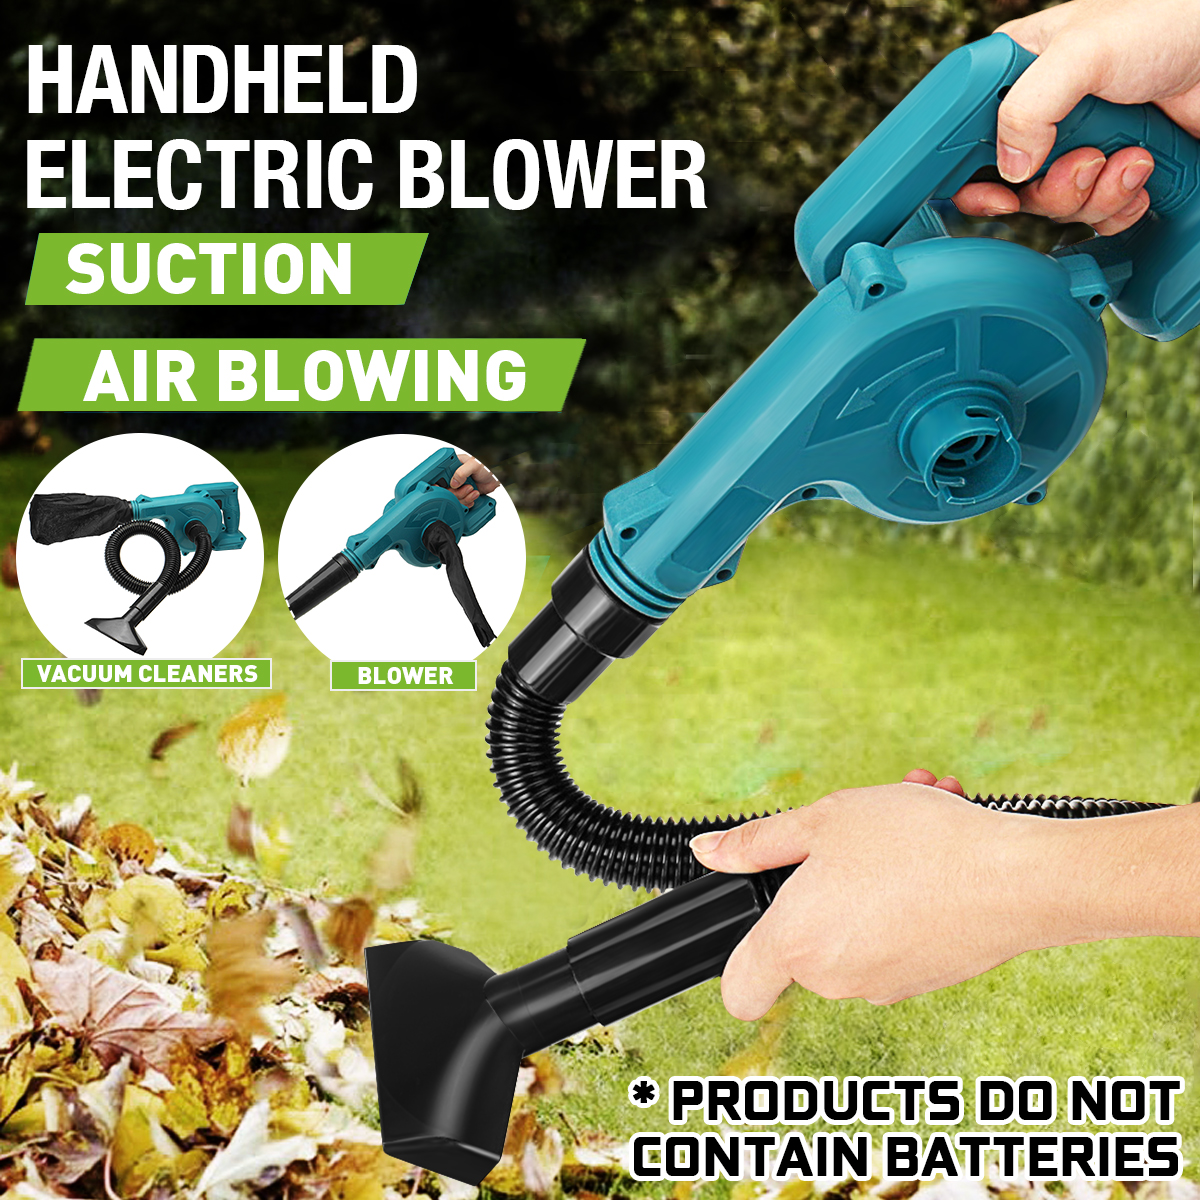 VIOLEWORKS-2-in-1-Electric-Air-Blower-Vacuum-Cleaner-Handheld-Dust-Collecting-Tool-For-Makita18V-Bat-1771460-1